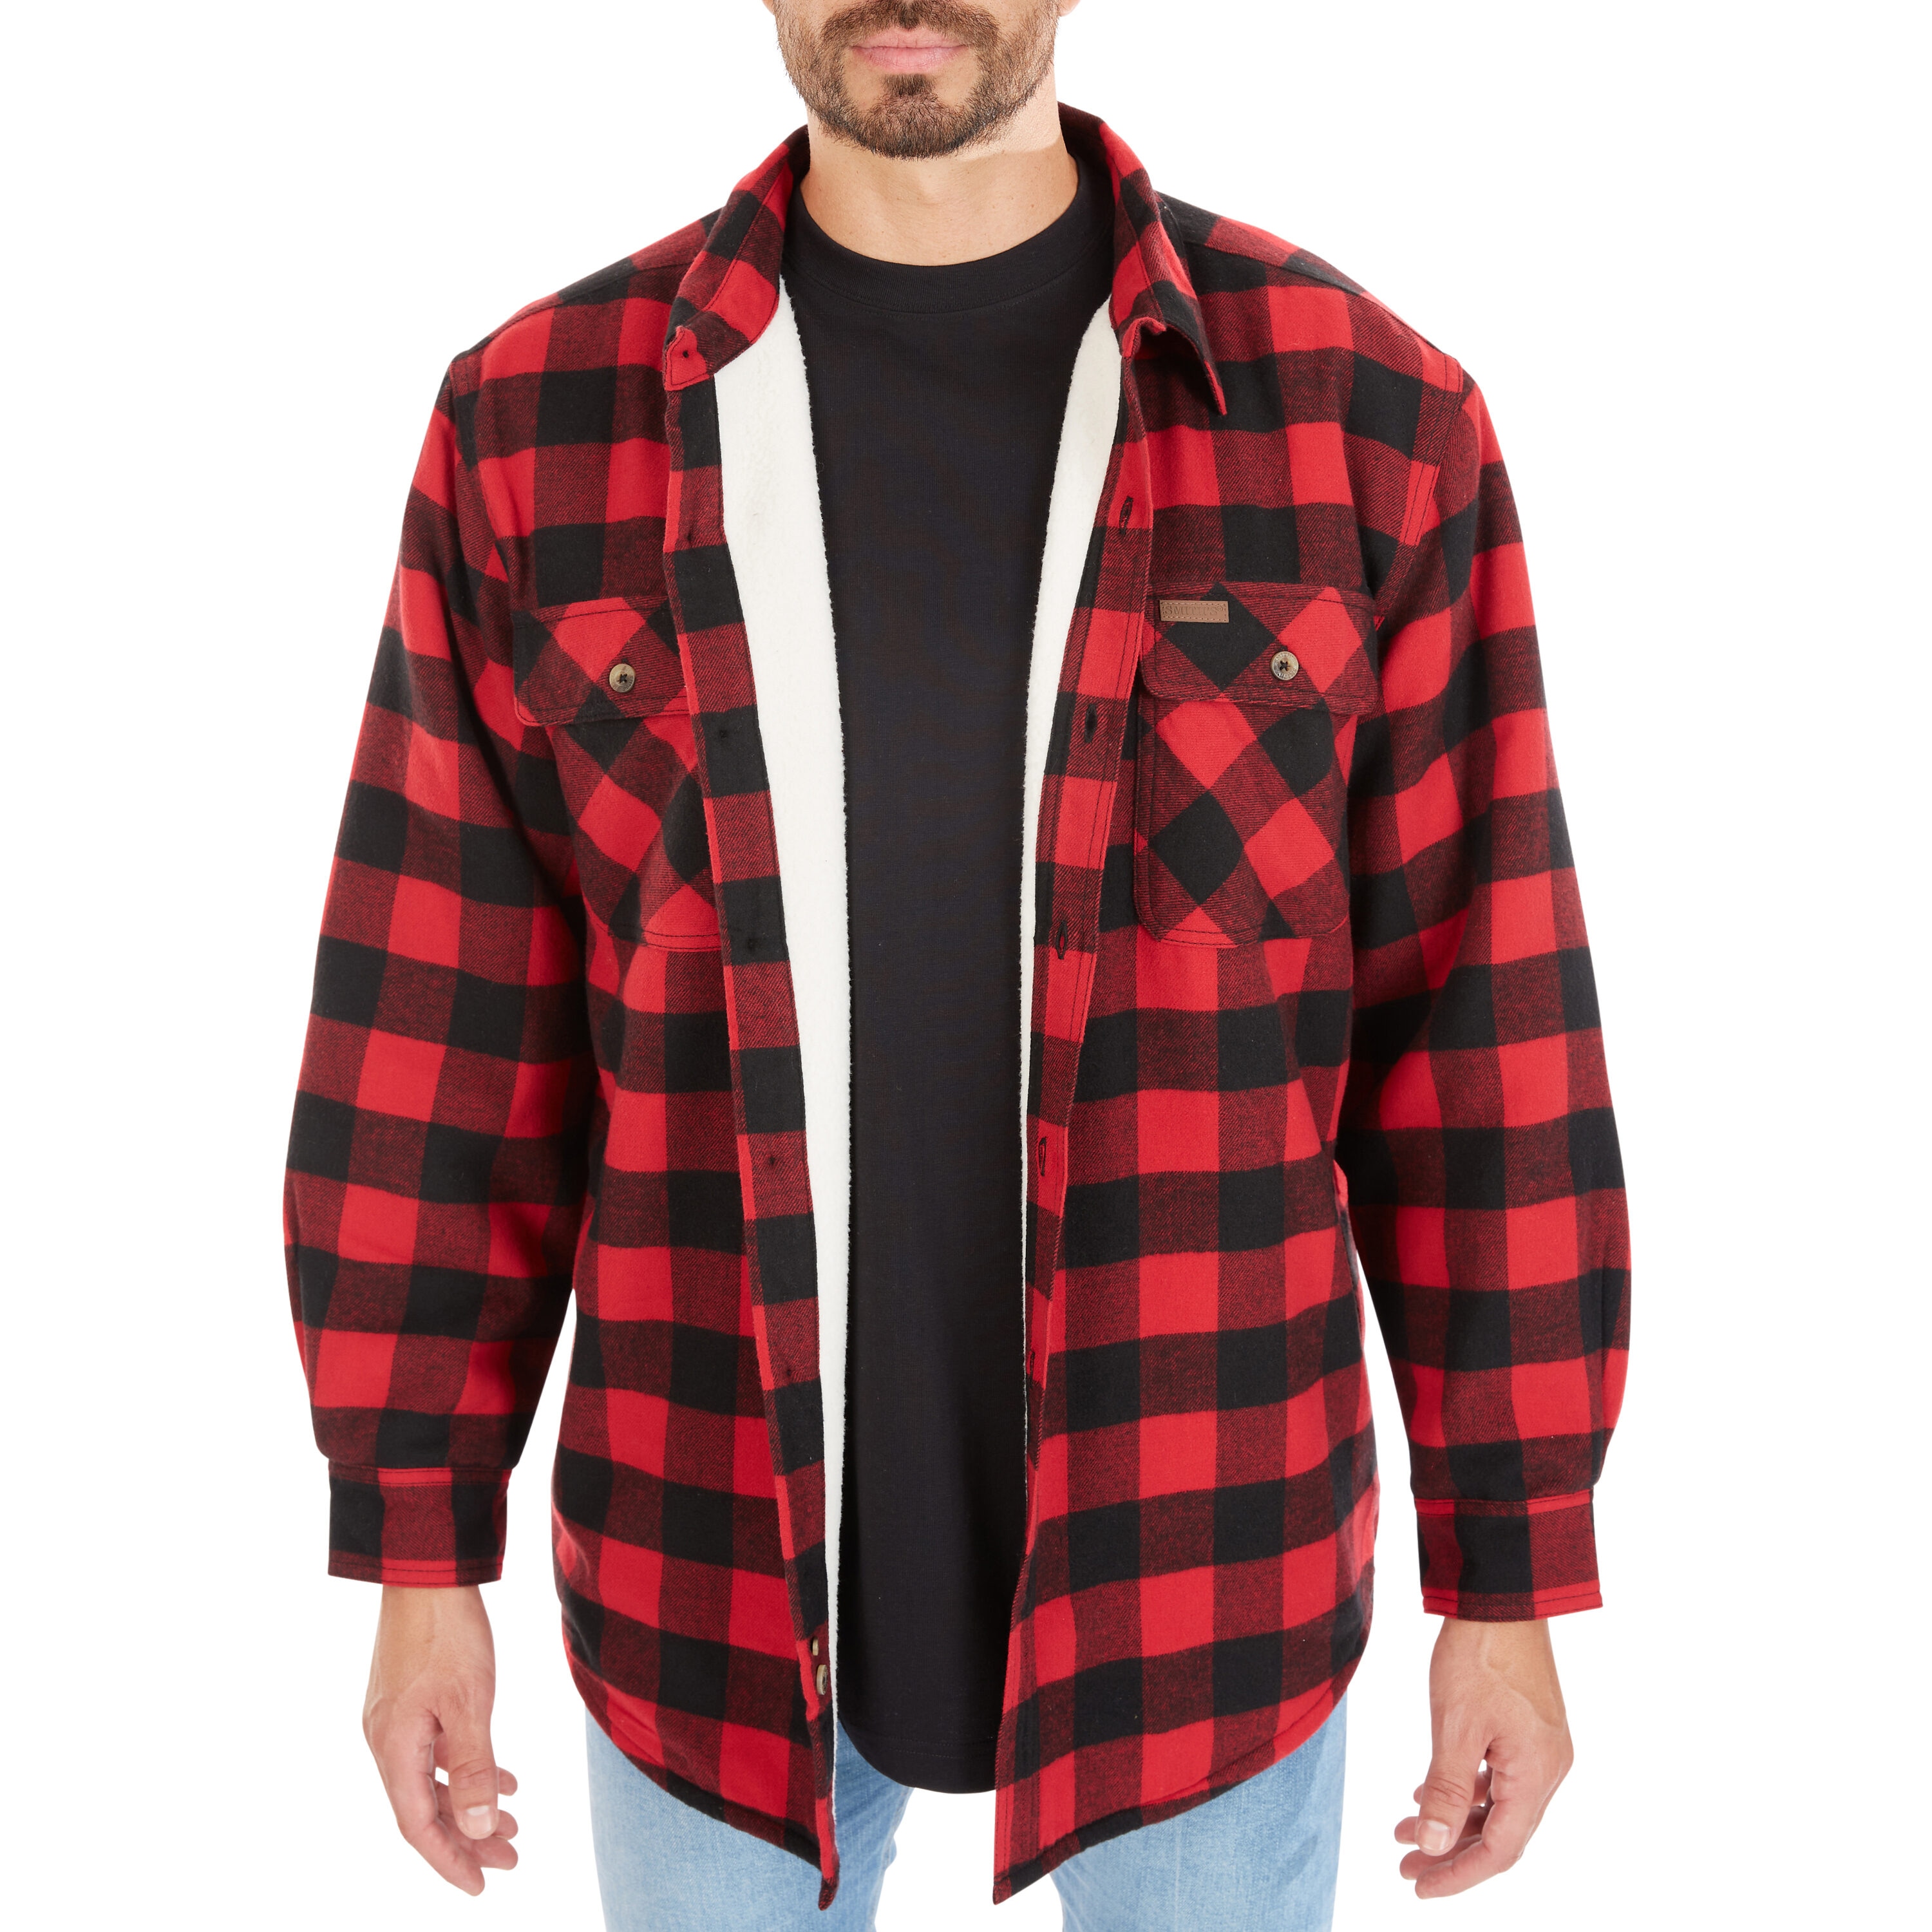 Smith's Workwear Sherpa-Lined Cotton Flannel Shirt Jacket in the